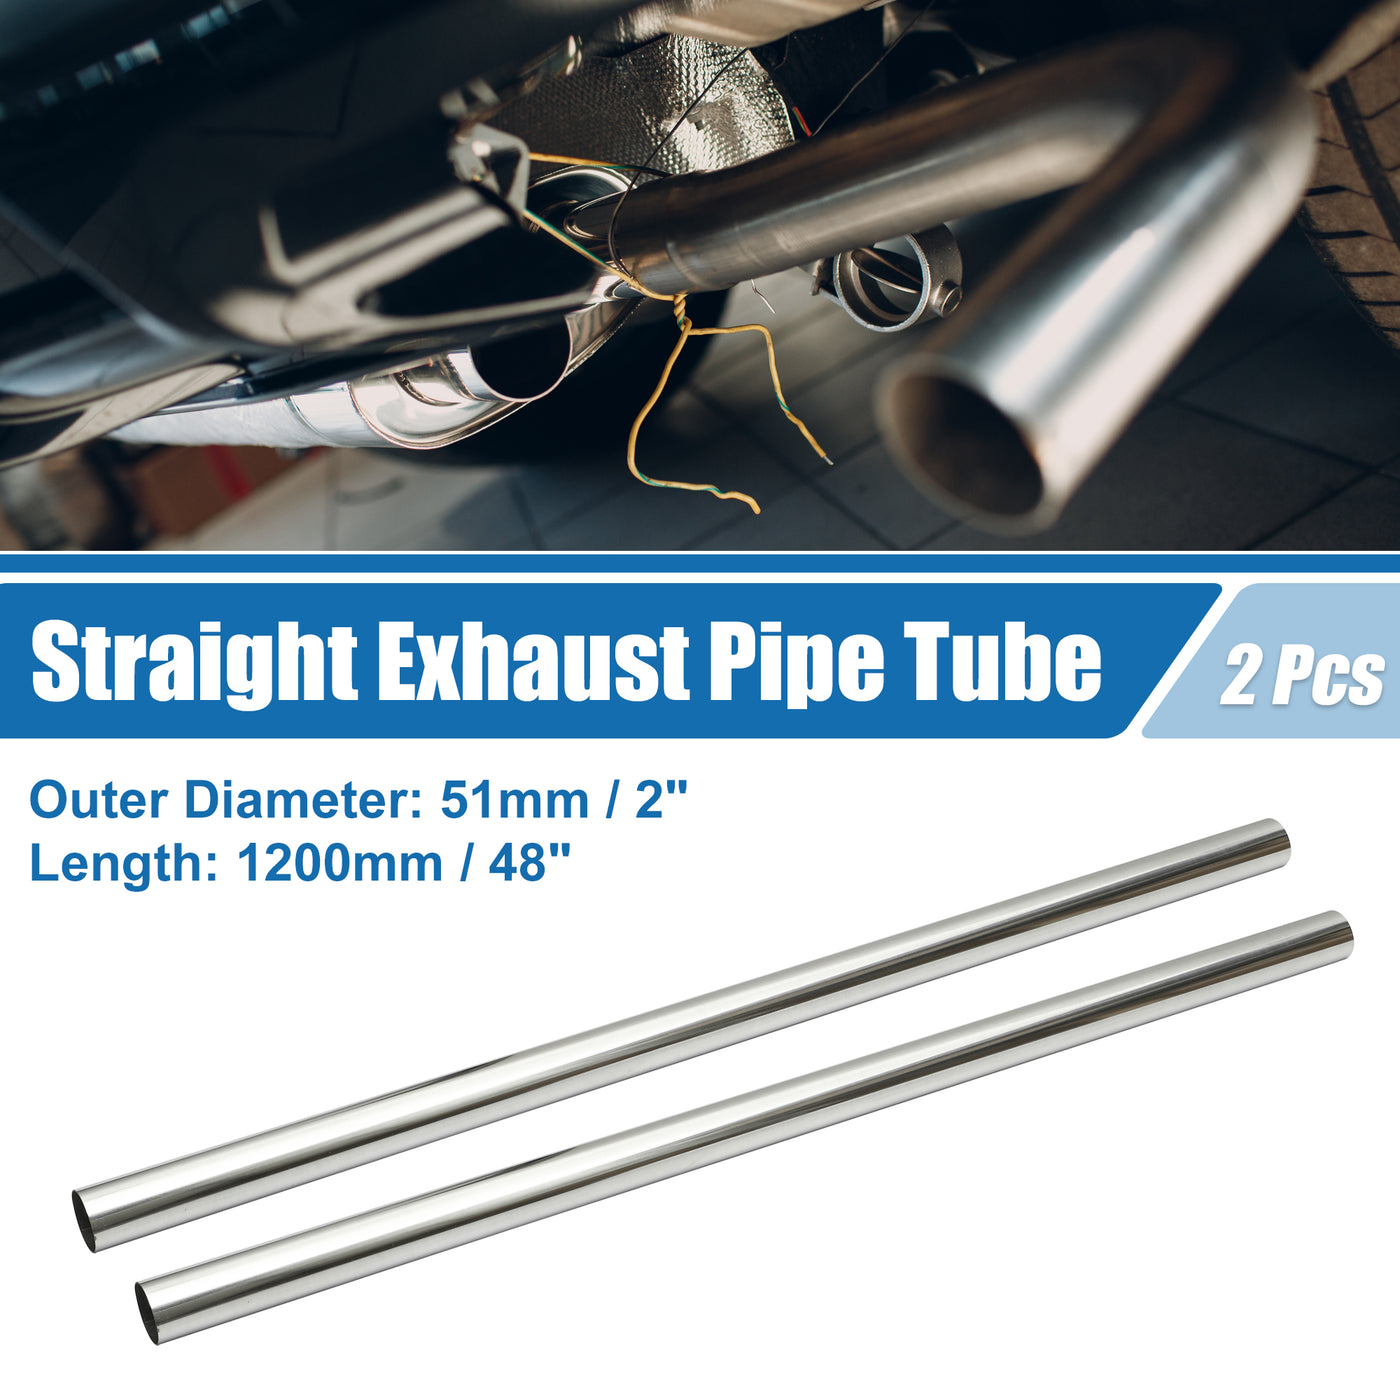 A ABSOPRO Car Mandrel Exhaust Pipe Tube Durable 48" Length 2'' OD Straight Exhaust Tube DIY Custom 0 Degree Modified Piping T304 Stainless Steel (Set of 2)